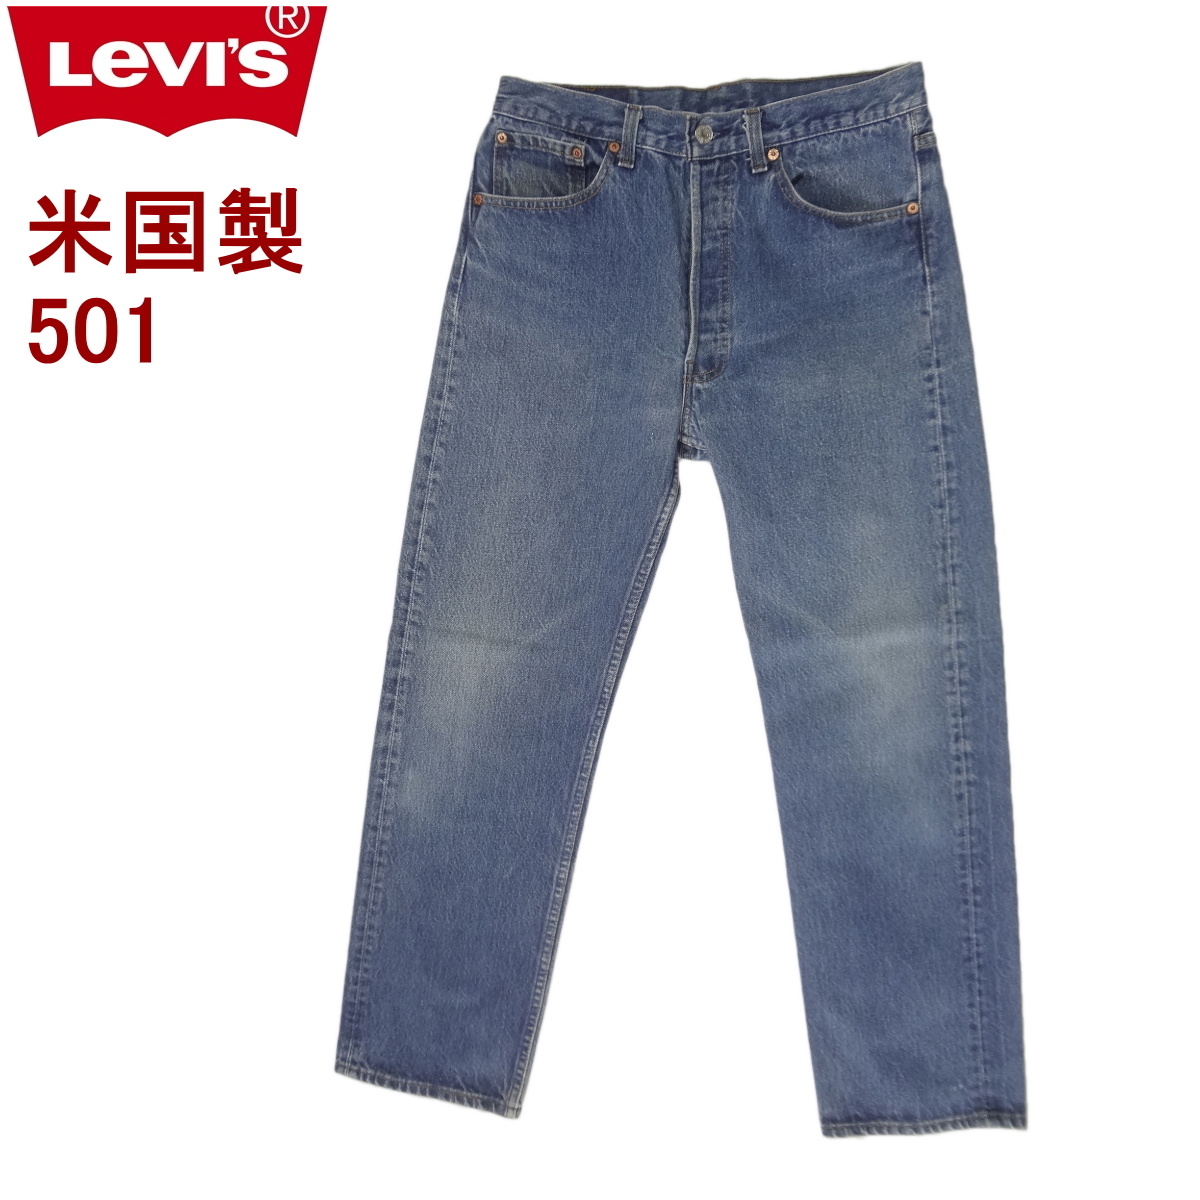 W33インチ リーバイス ジーンズ 501 米国製 アメリカ製 Levi's MADE IN THE USA